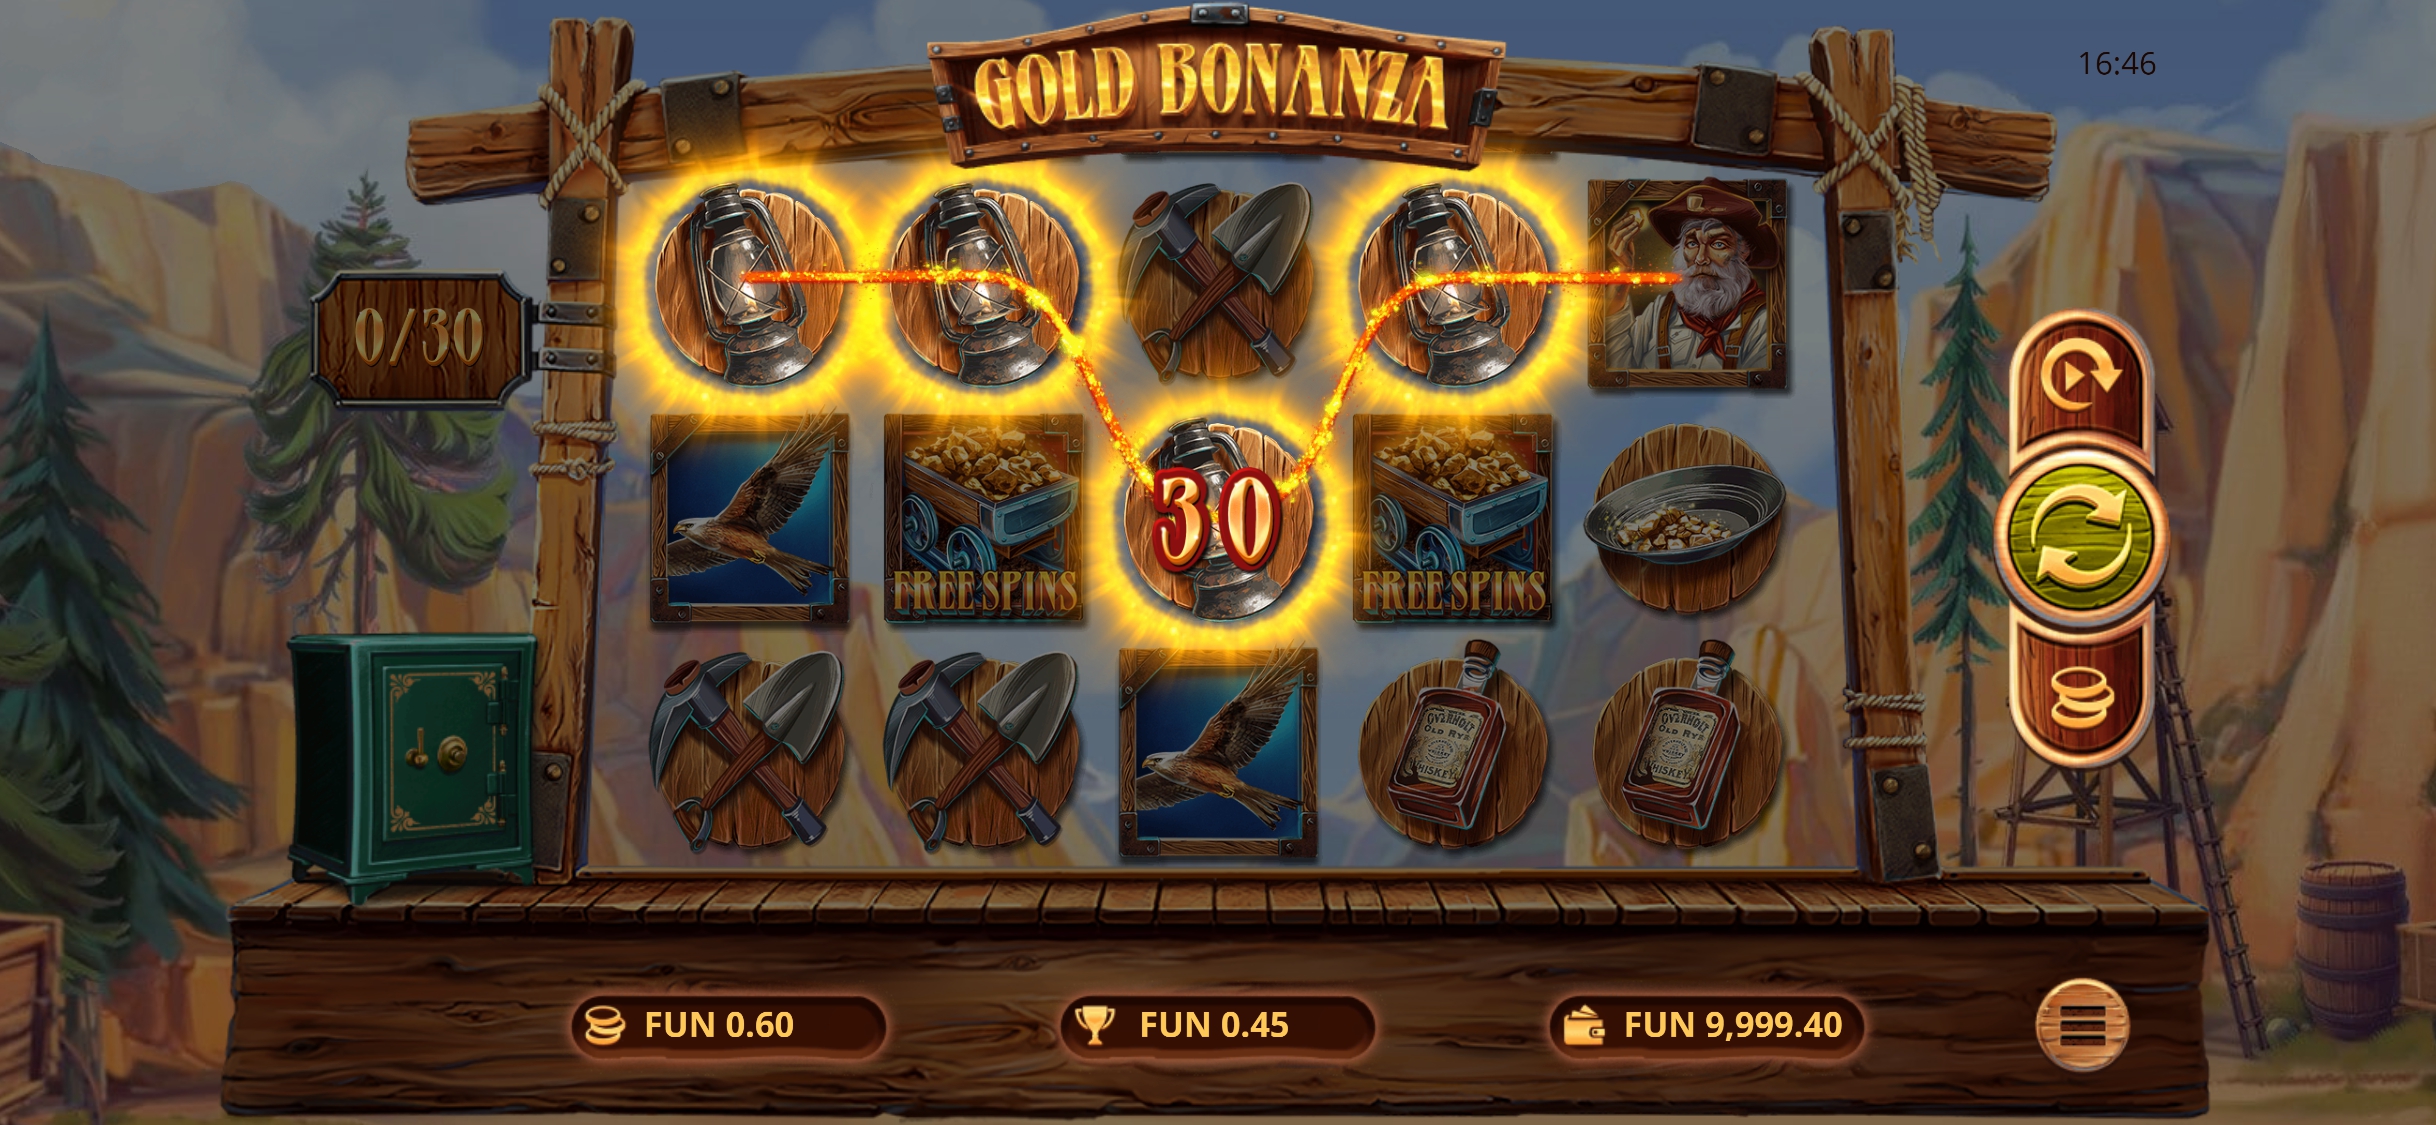 1Bet Casino Mobile Slot Games Review